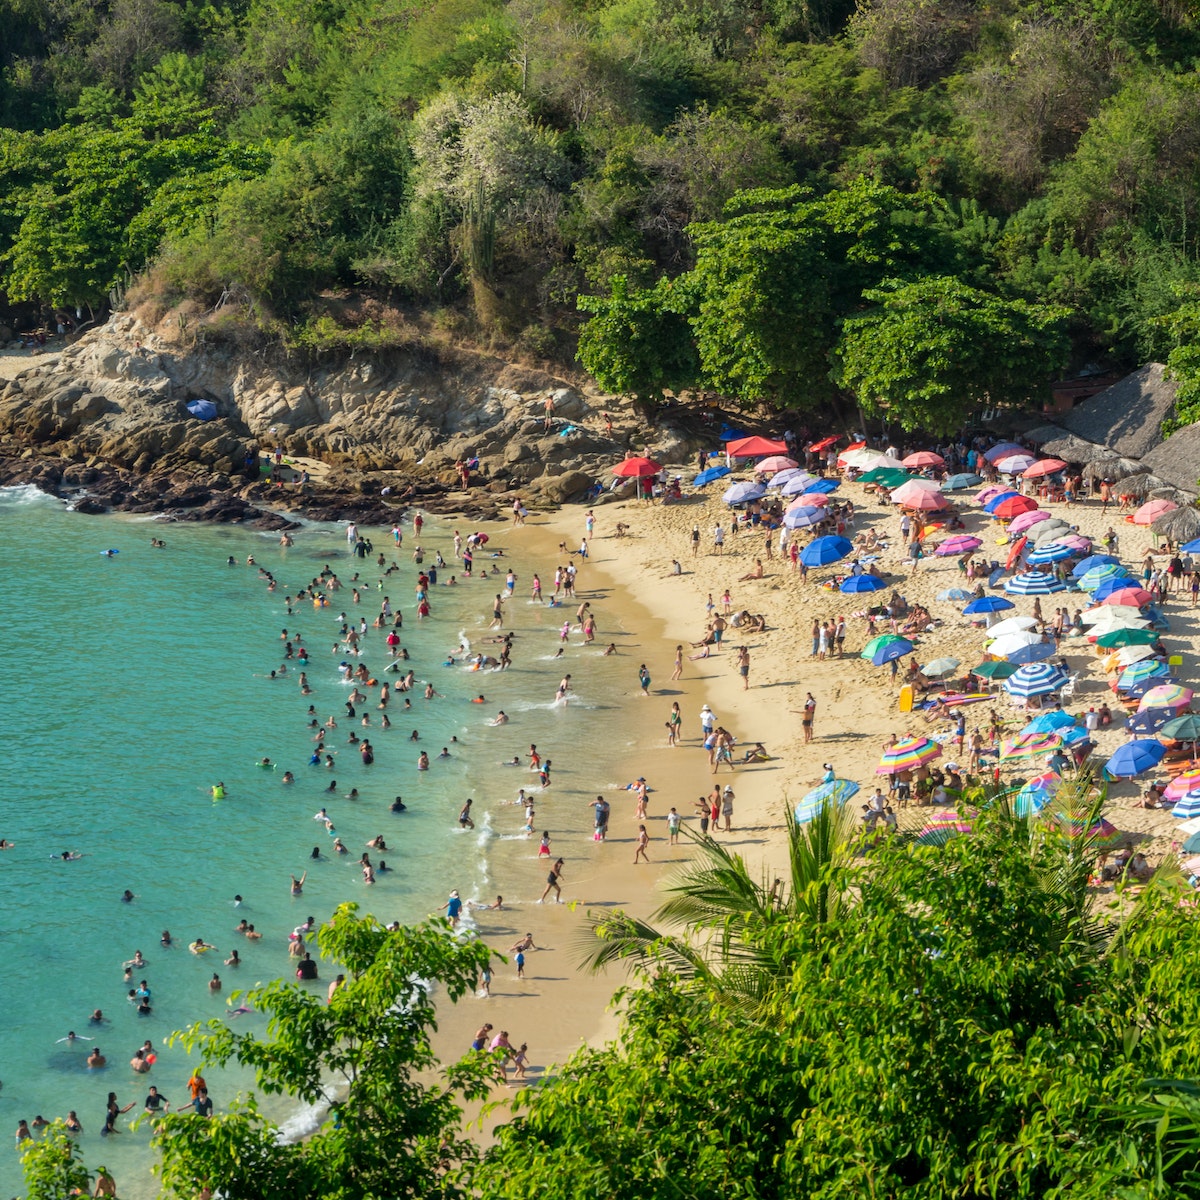 January 2018: The crowded beach of Playa Carrizalillo in Puerto Escondido.
1046221246
background, beach, beautiful, blue, carrizalillo, city, coast, color, crowded, day, escondido, green, holiday, landscape, manzanillo, mexico, natural, nature, oaxaca, ocean, outdoor, outdoors, pacific, palm, people, playa, puerto, relax, resort, sand, scenery, scenic, sea, shore, sky, summer, sun, sunny, sunset, tourism, tourist, town, travel, tropical, vacation, vallarta, view, water, wave, white